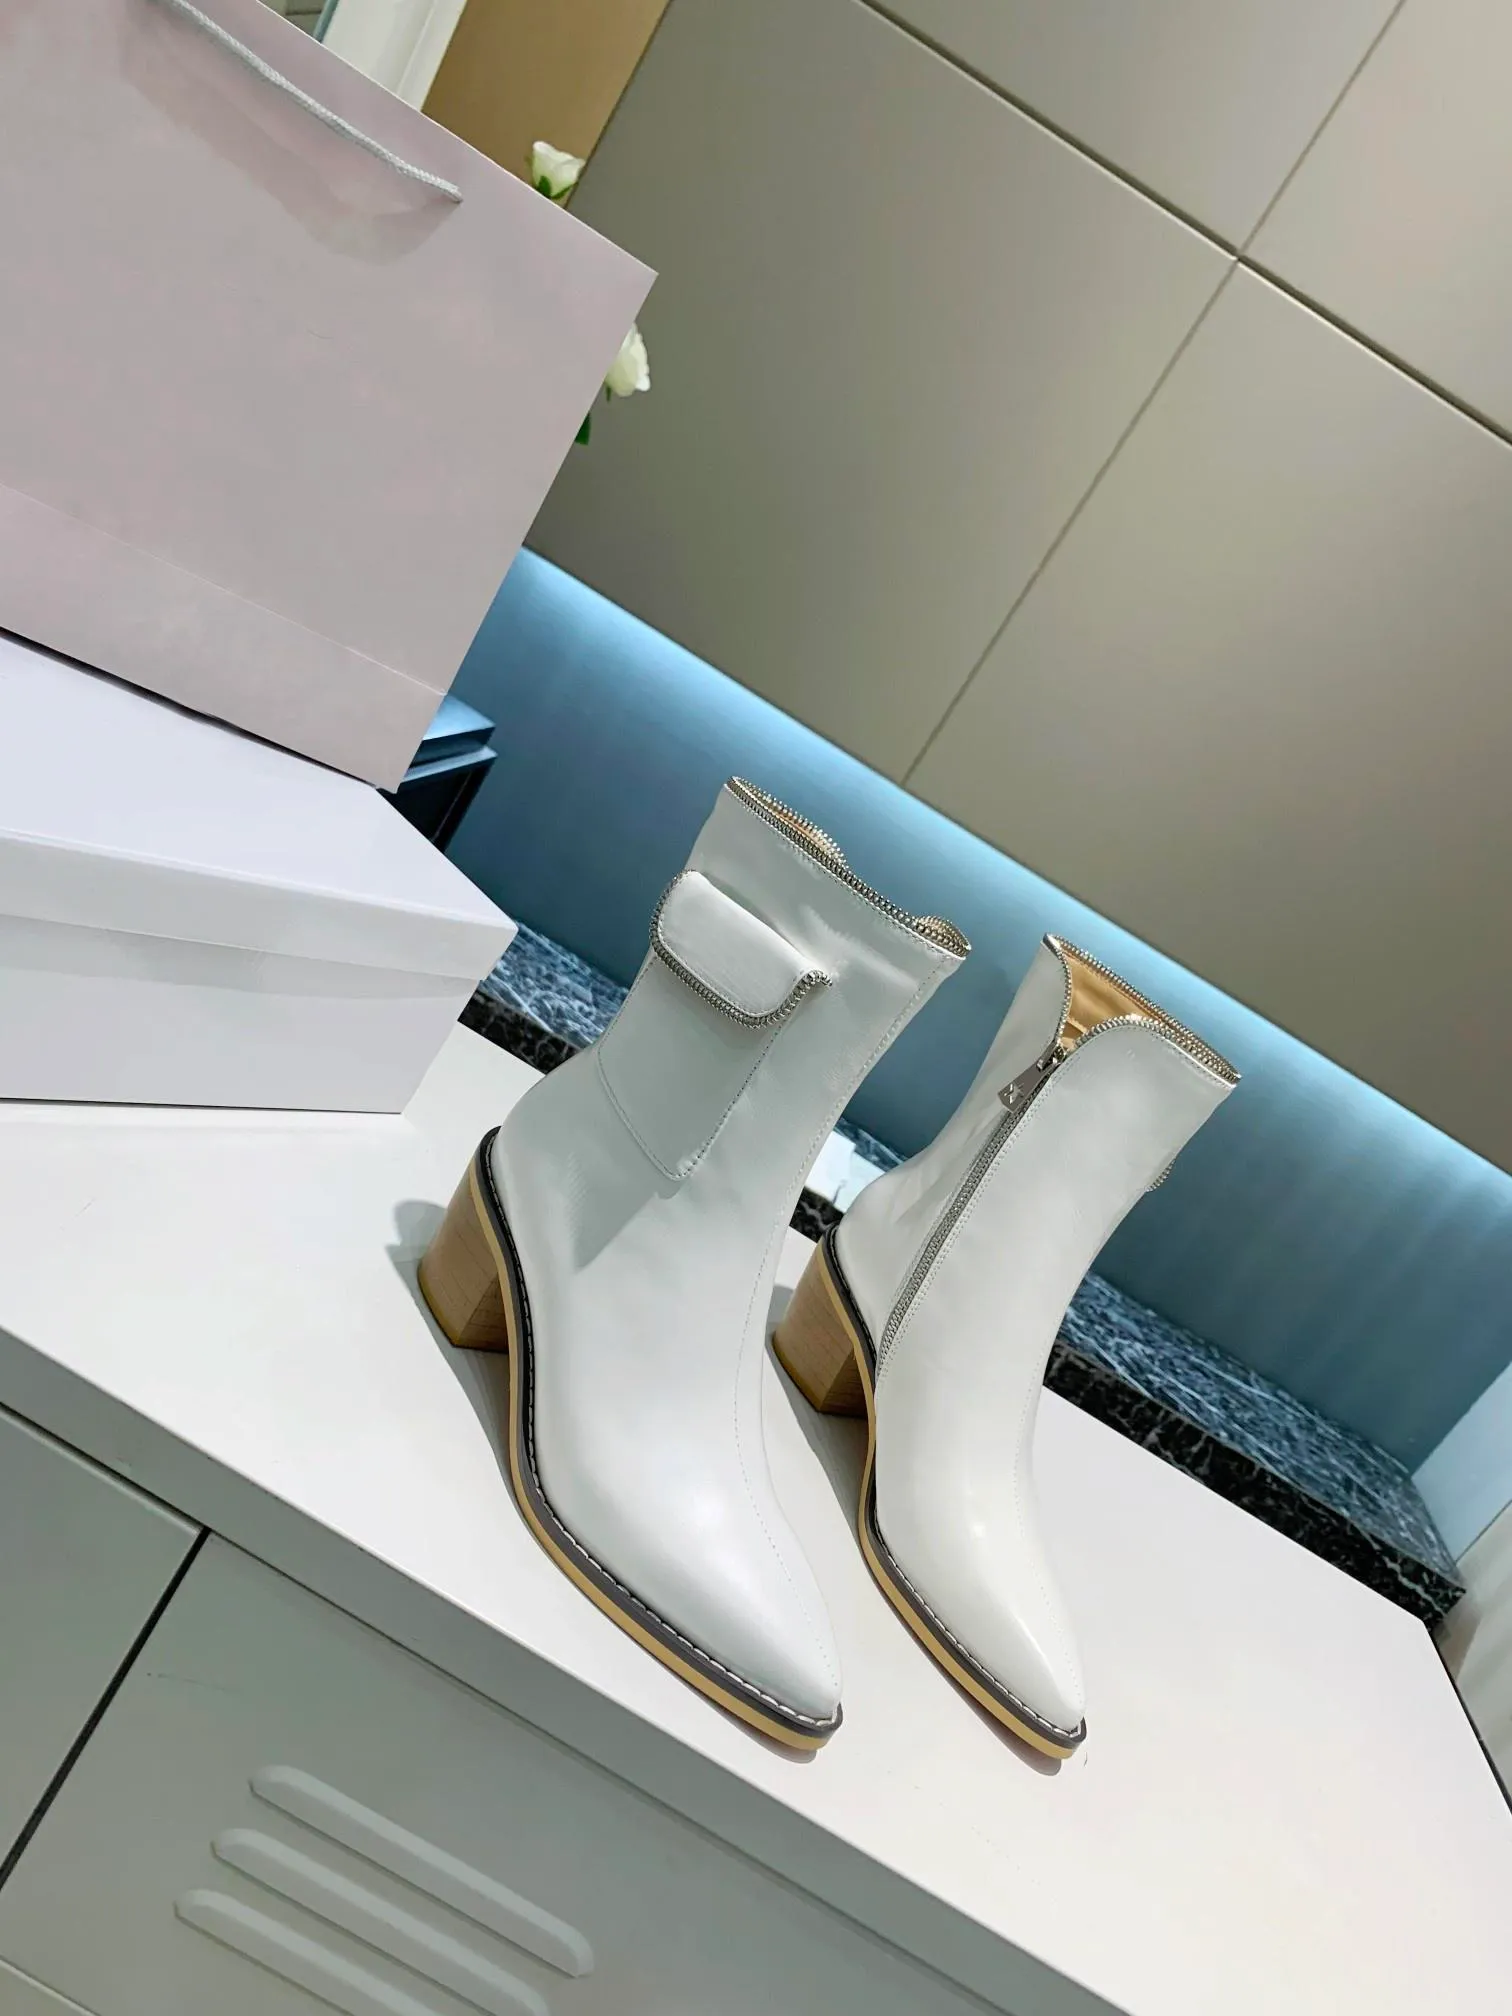 High heeled Fashion boots Autumn winter Coarse heel designer women shoes 100% Soft cowhide Zipper luxury Pointed Boot leather lady Wedges Heels size 35-40-41 us5-us10